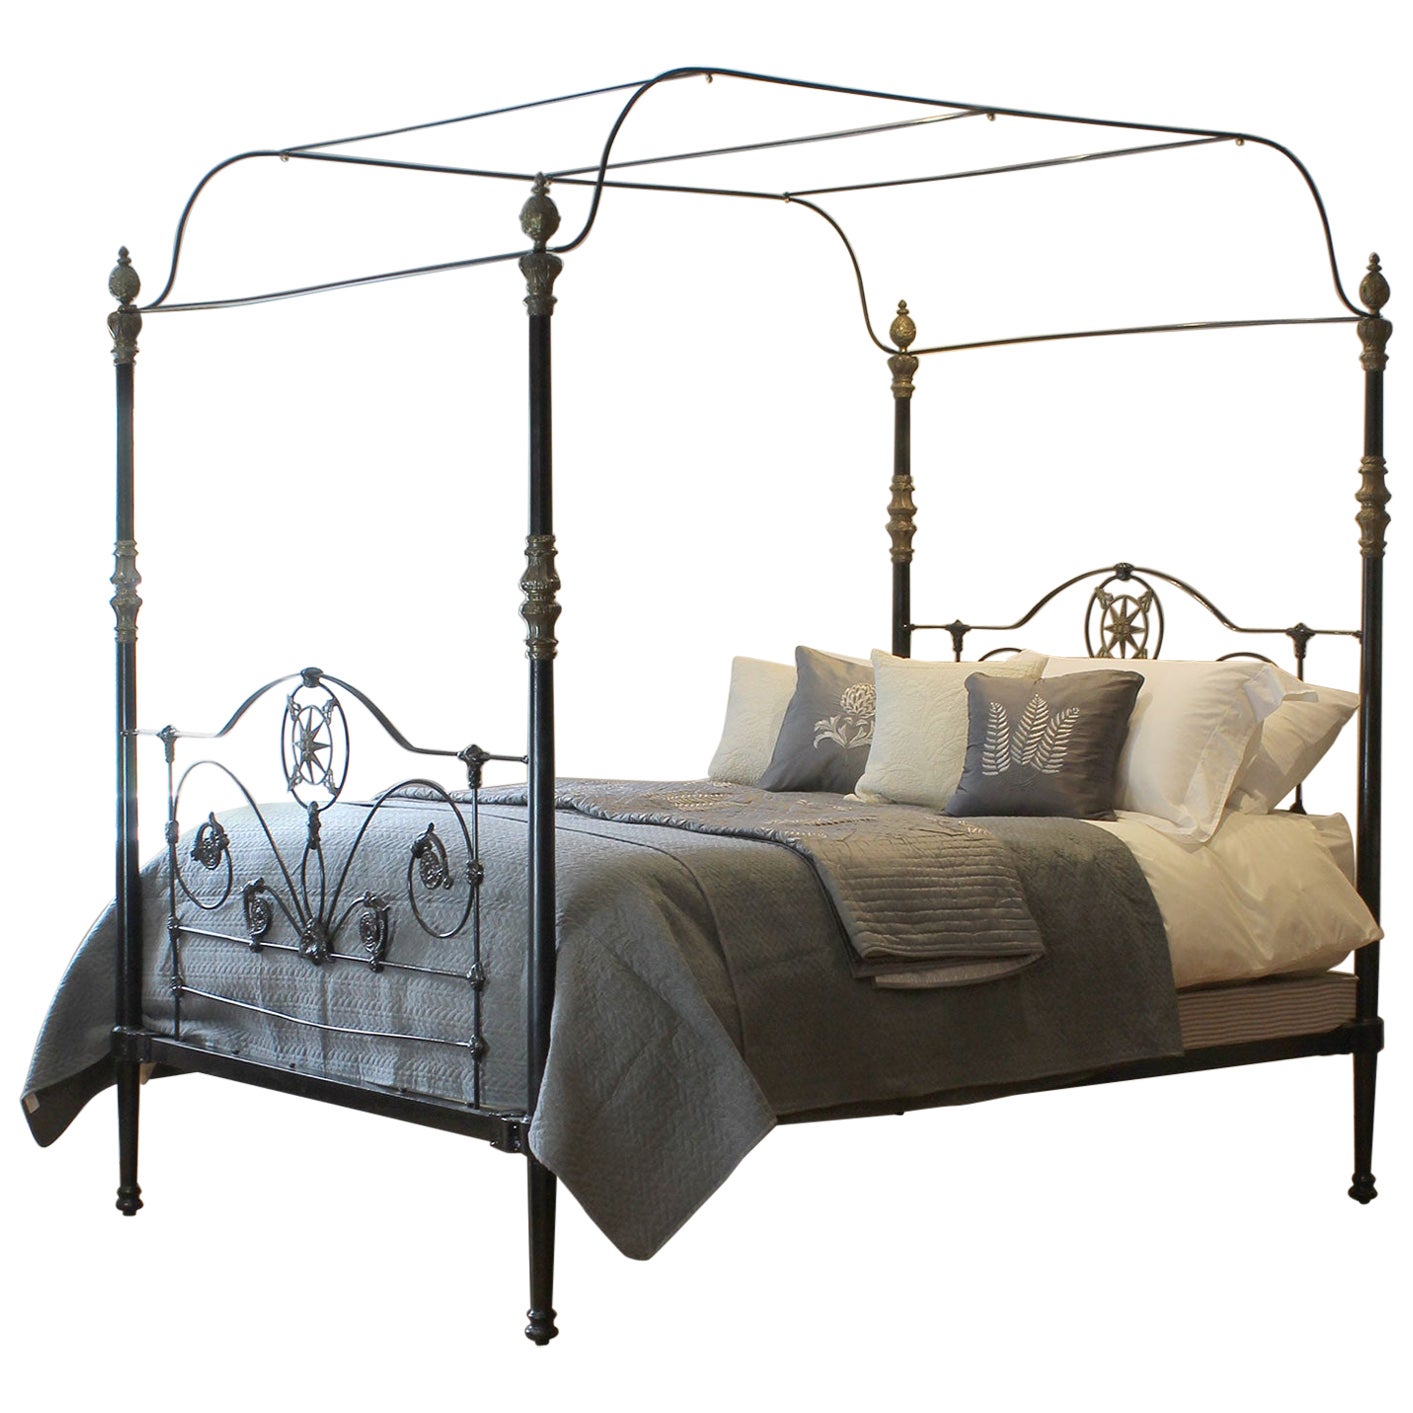 What is the difference between a canopy bed and a four poster bed?